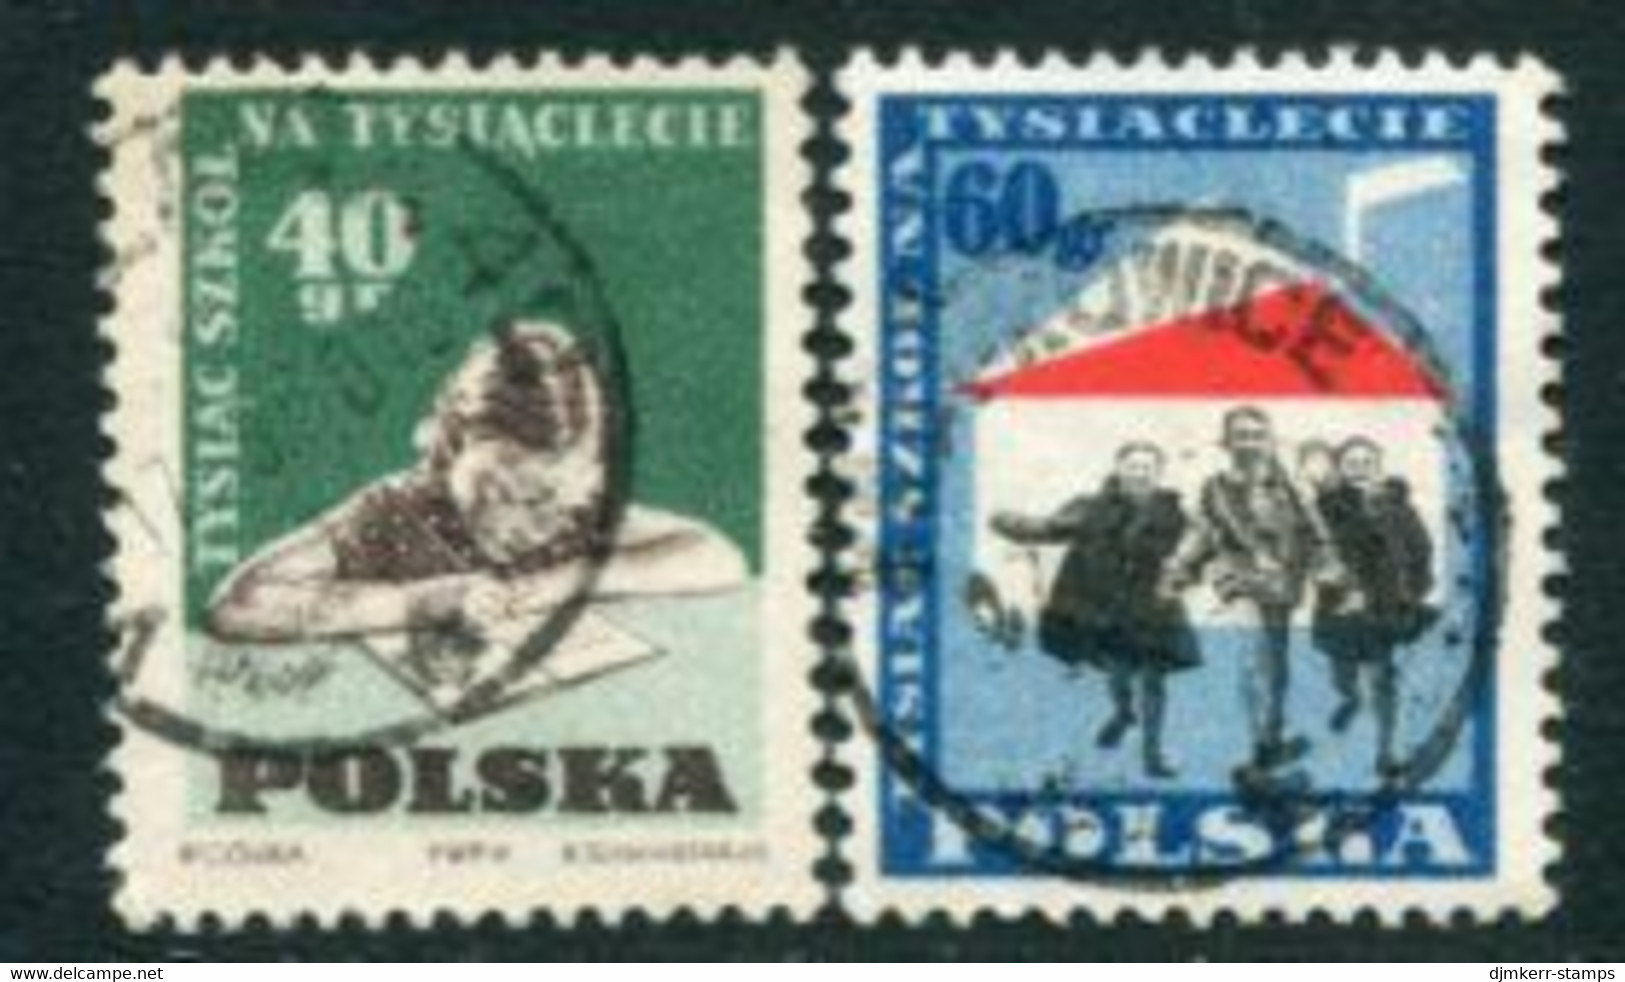 POLAND 1959 Schools For Polish Millenary Used  Michel 1130-31 - Used Stamps